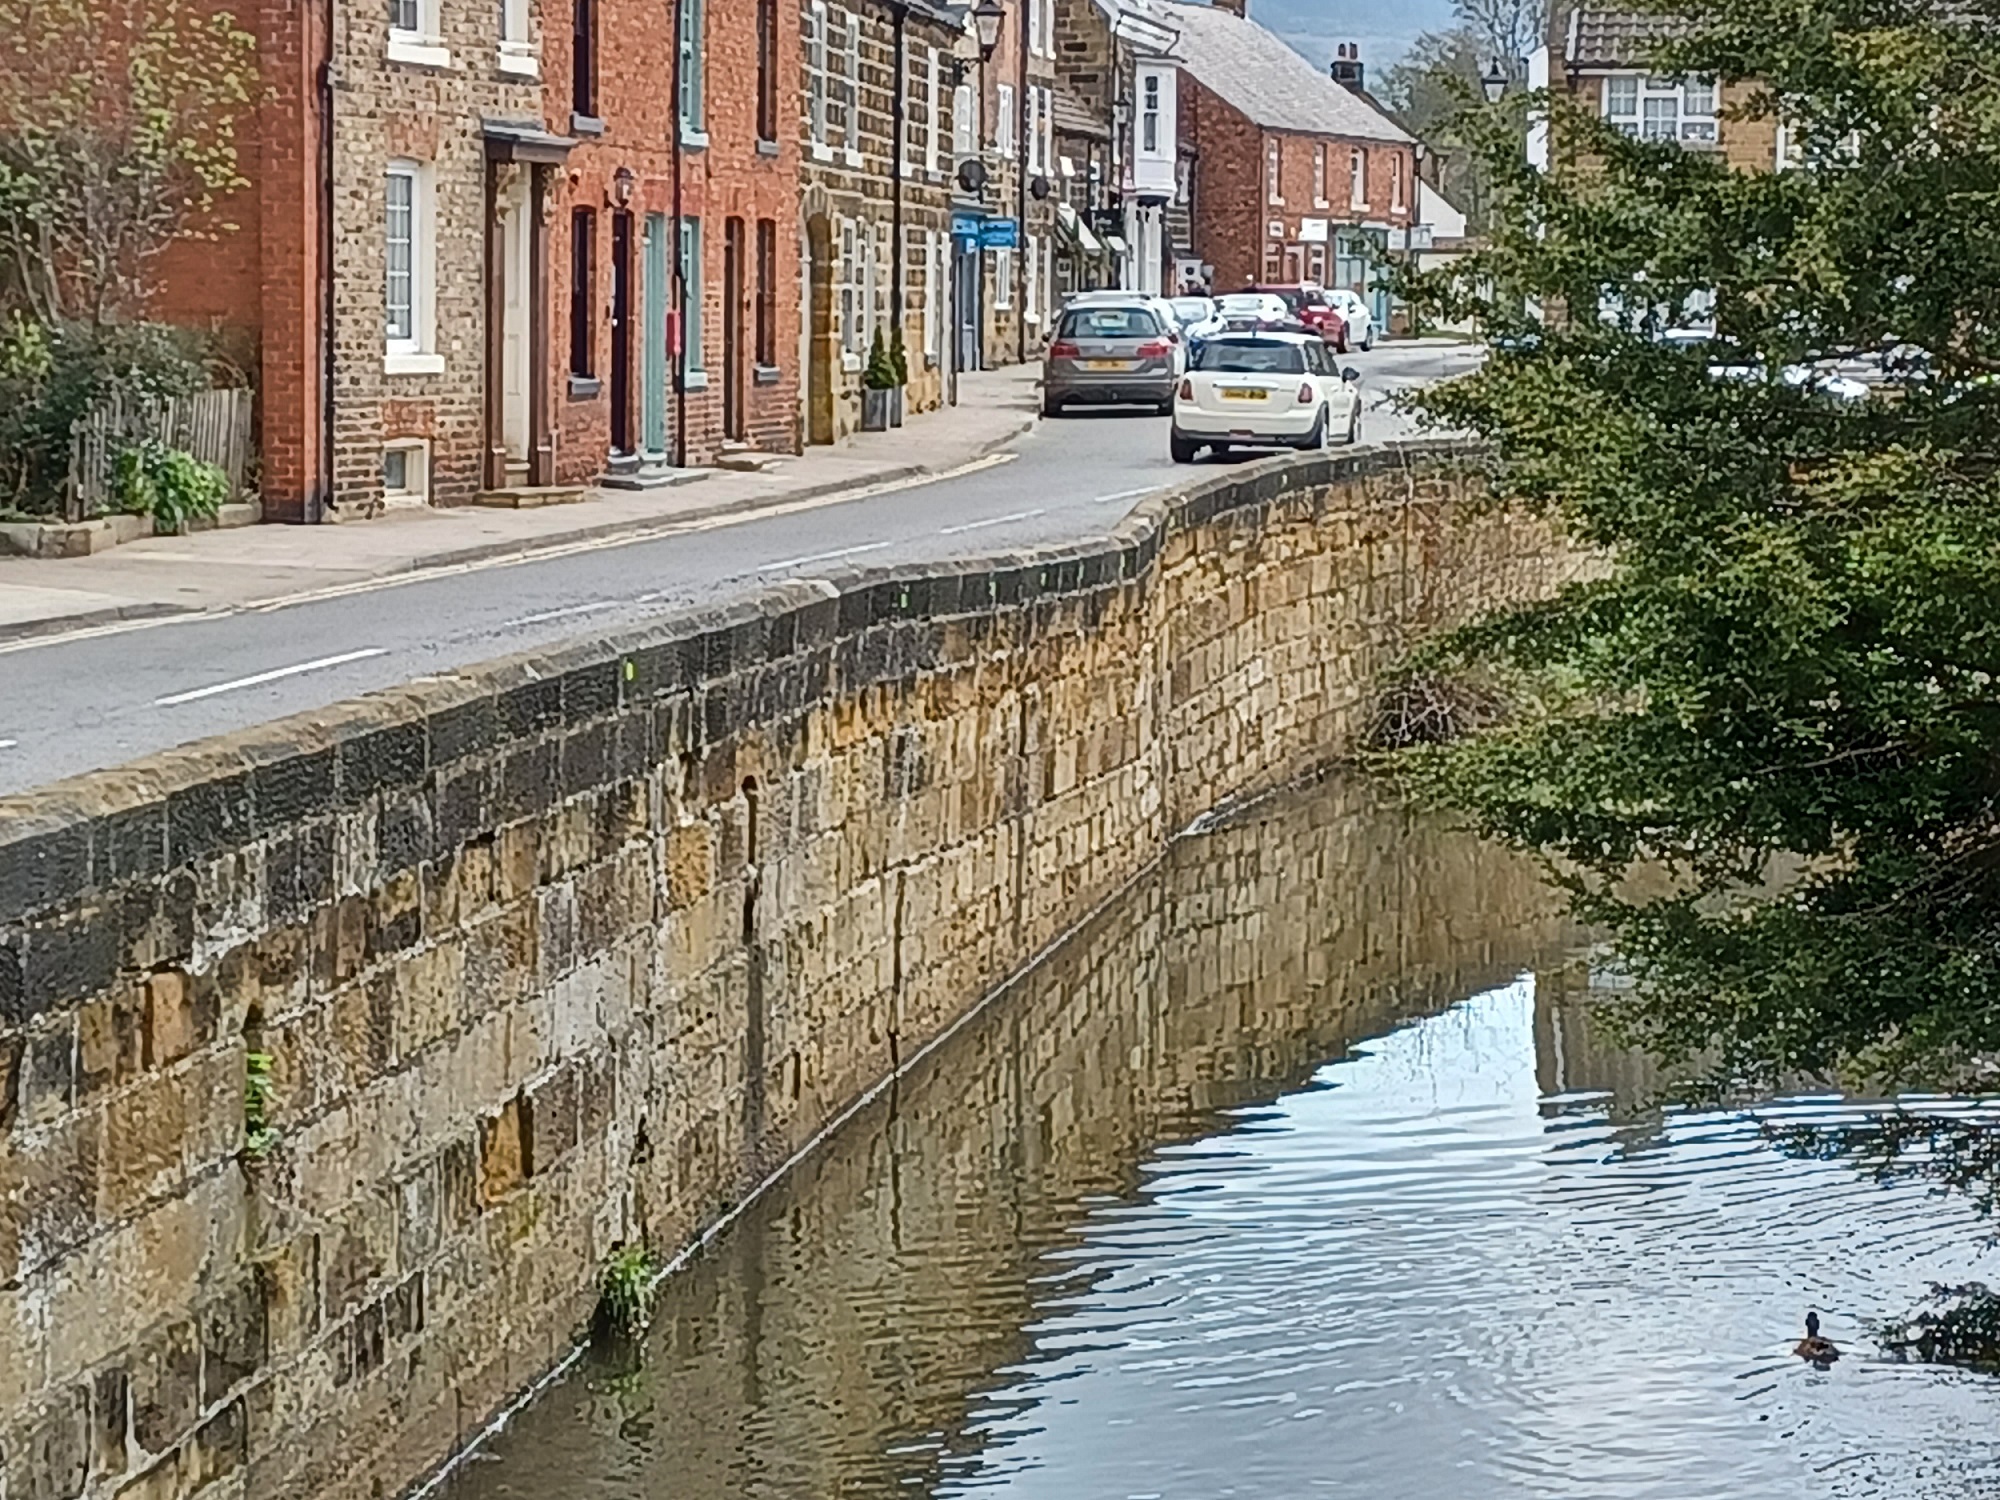 The wall which is in need or repair in Great Ayton